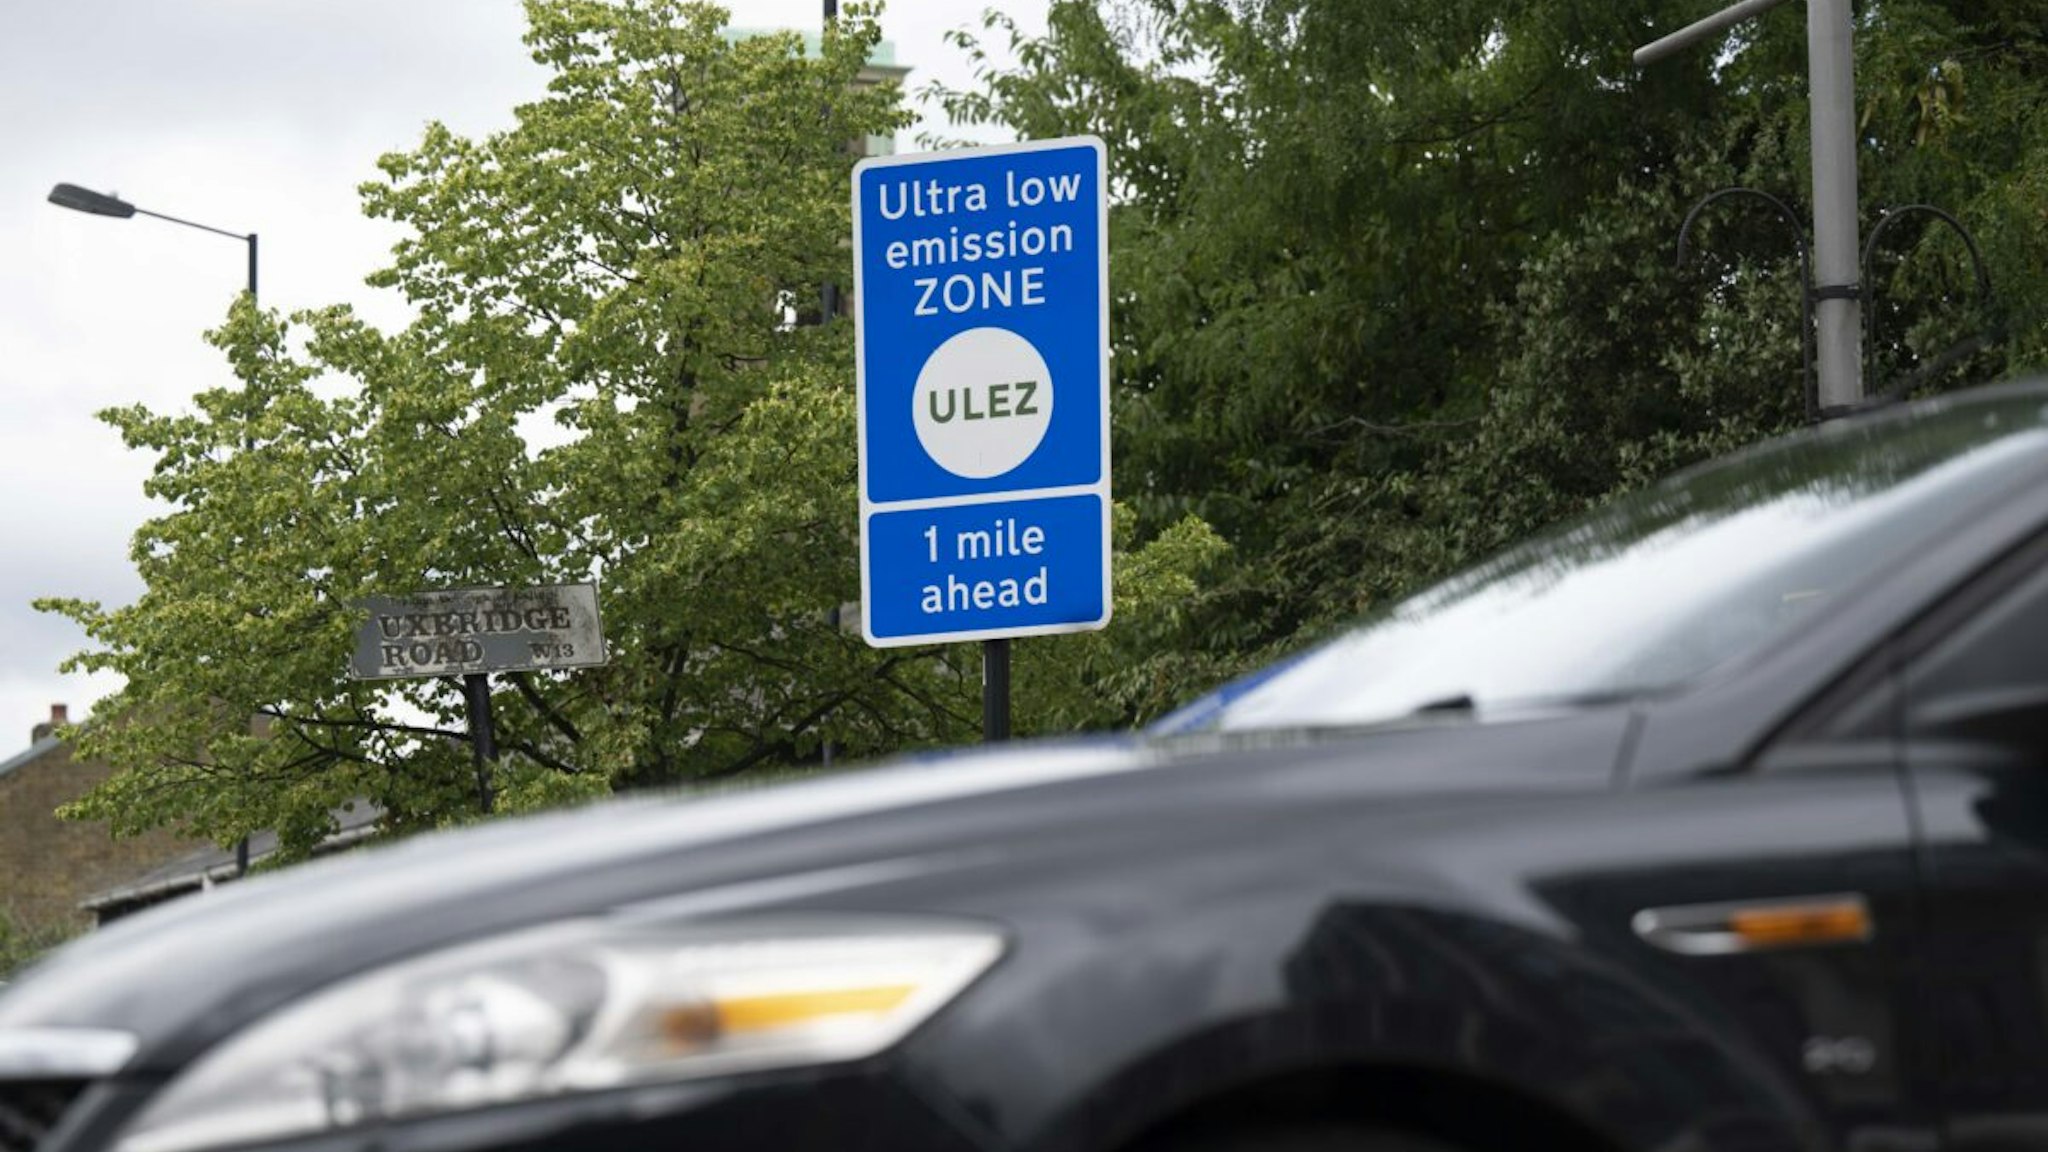 A sign indicating Ultra Low Emissions Zone (ULEZ) is seen on the street in London, United Kingdom on August 04, 2023.